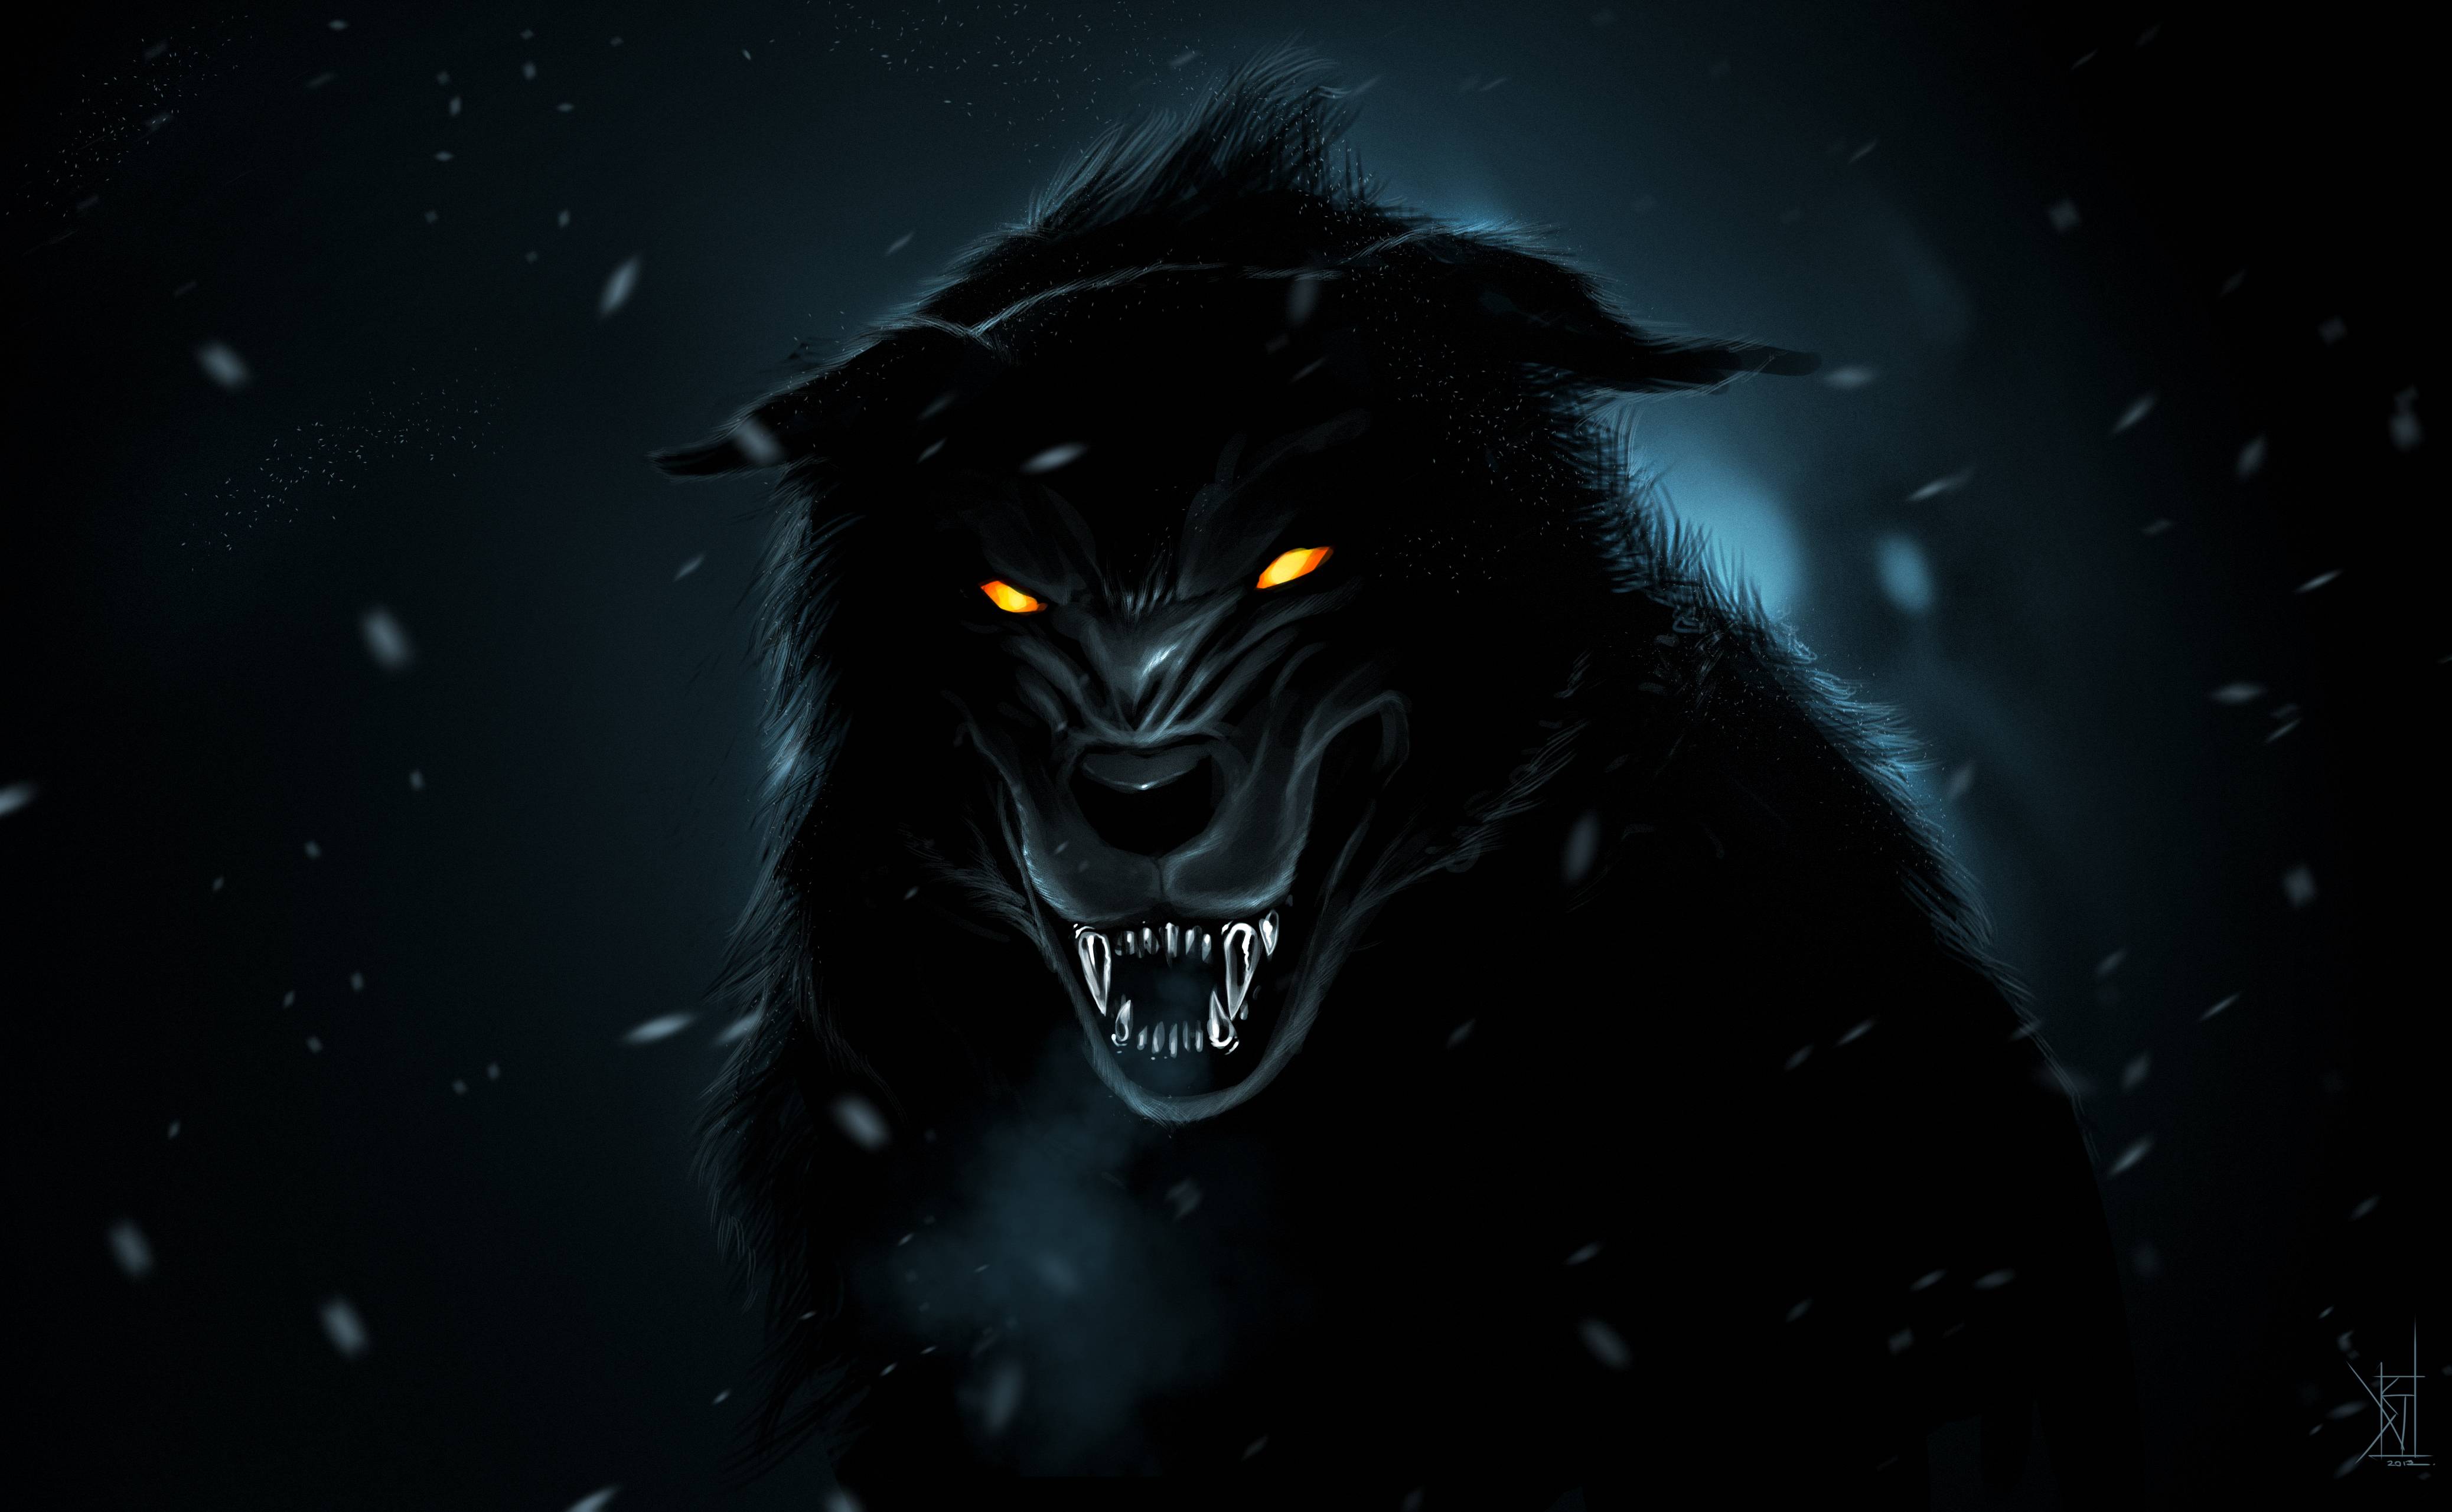 Black Wolf Wallpaper Android Apps on Google Play. Art Wallpaper